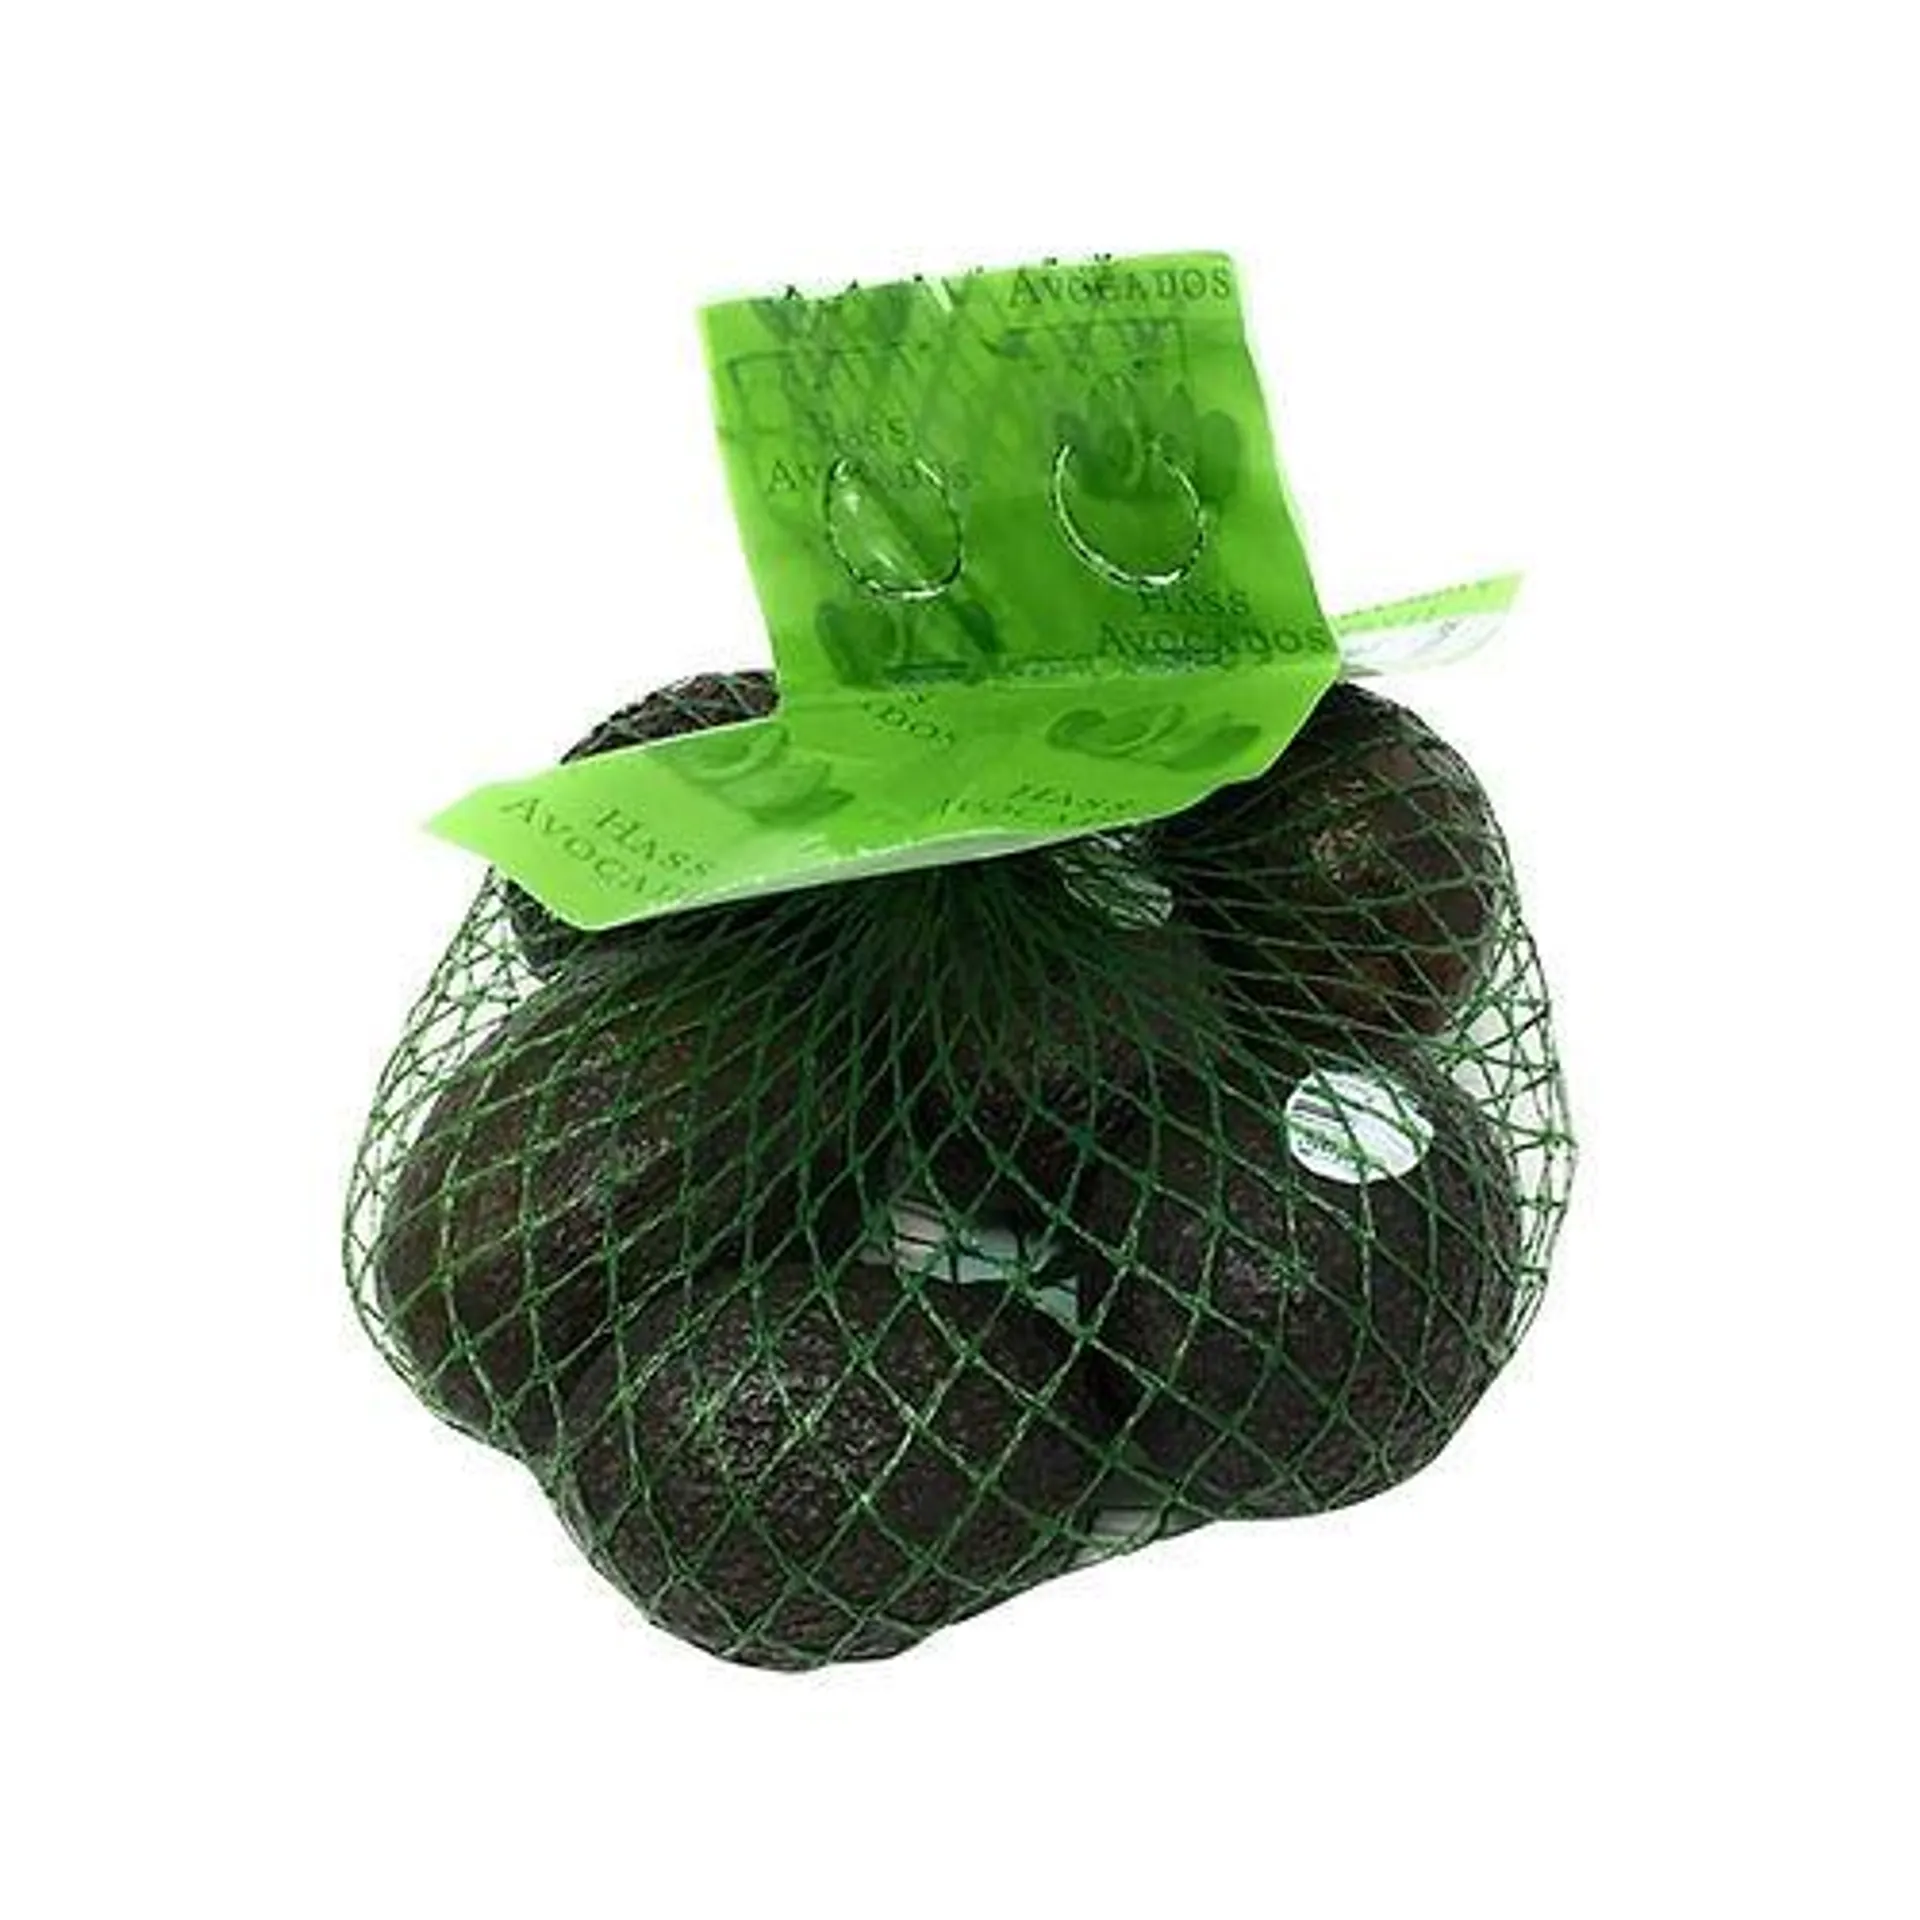 Hass Avocados (5 Pack)